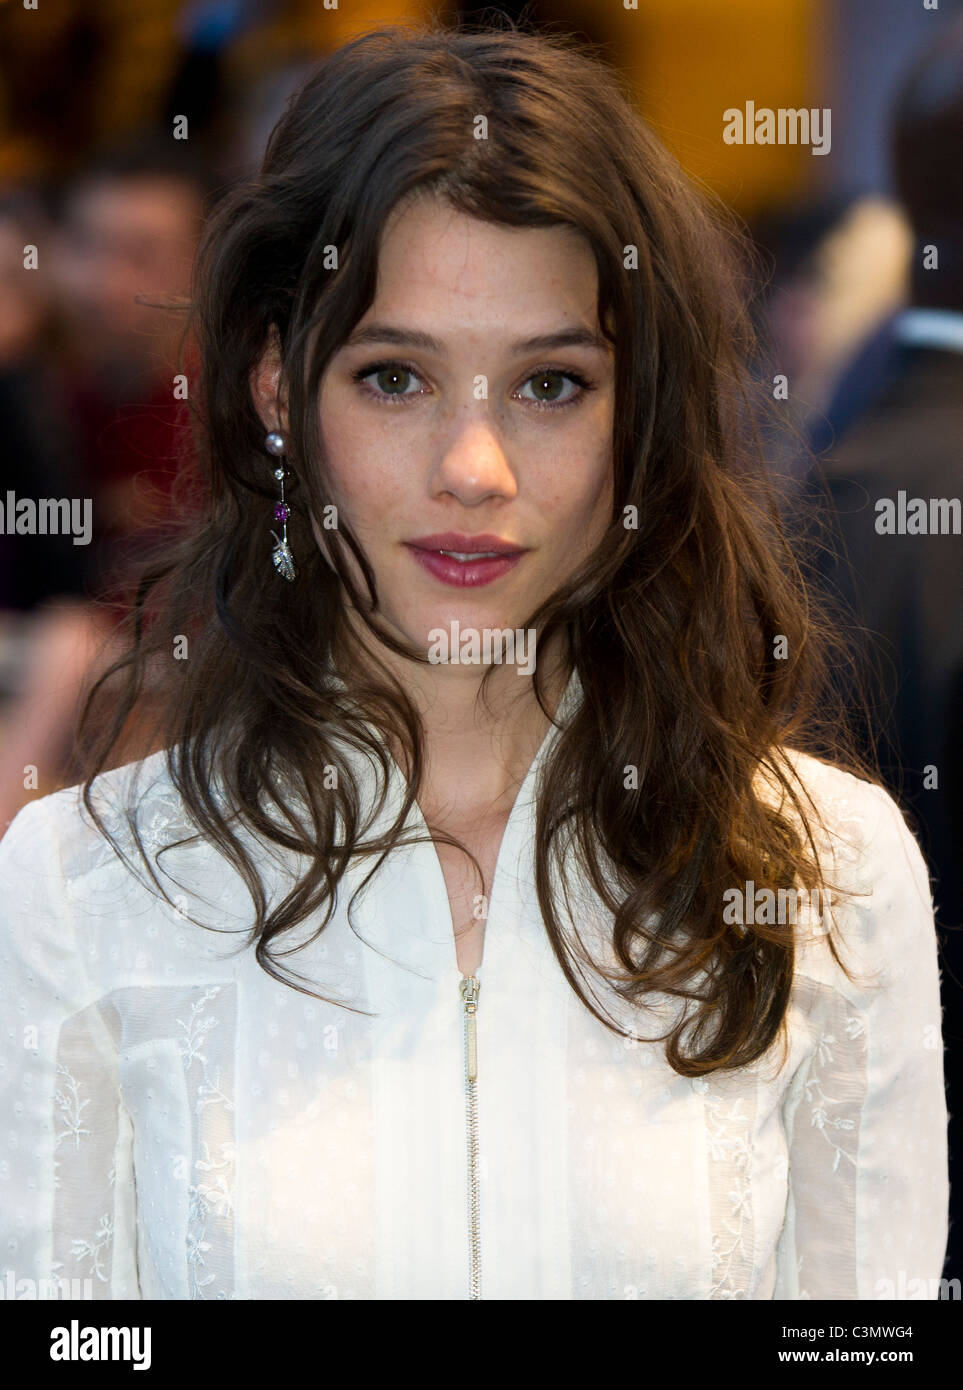 Astrid berges frisbey hot